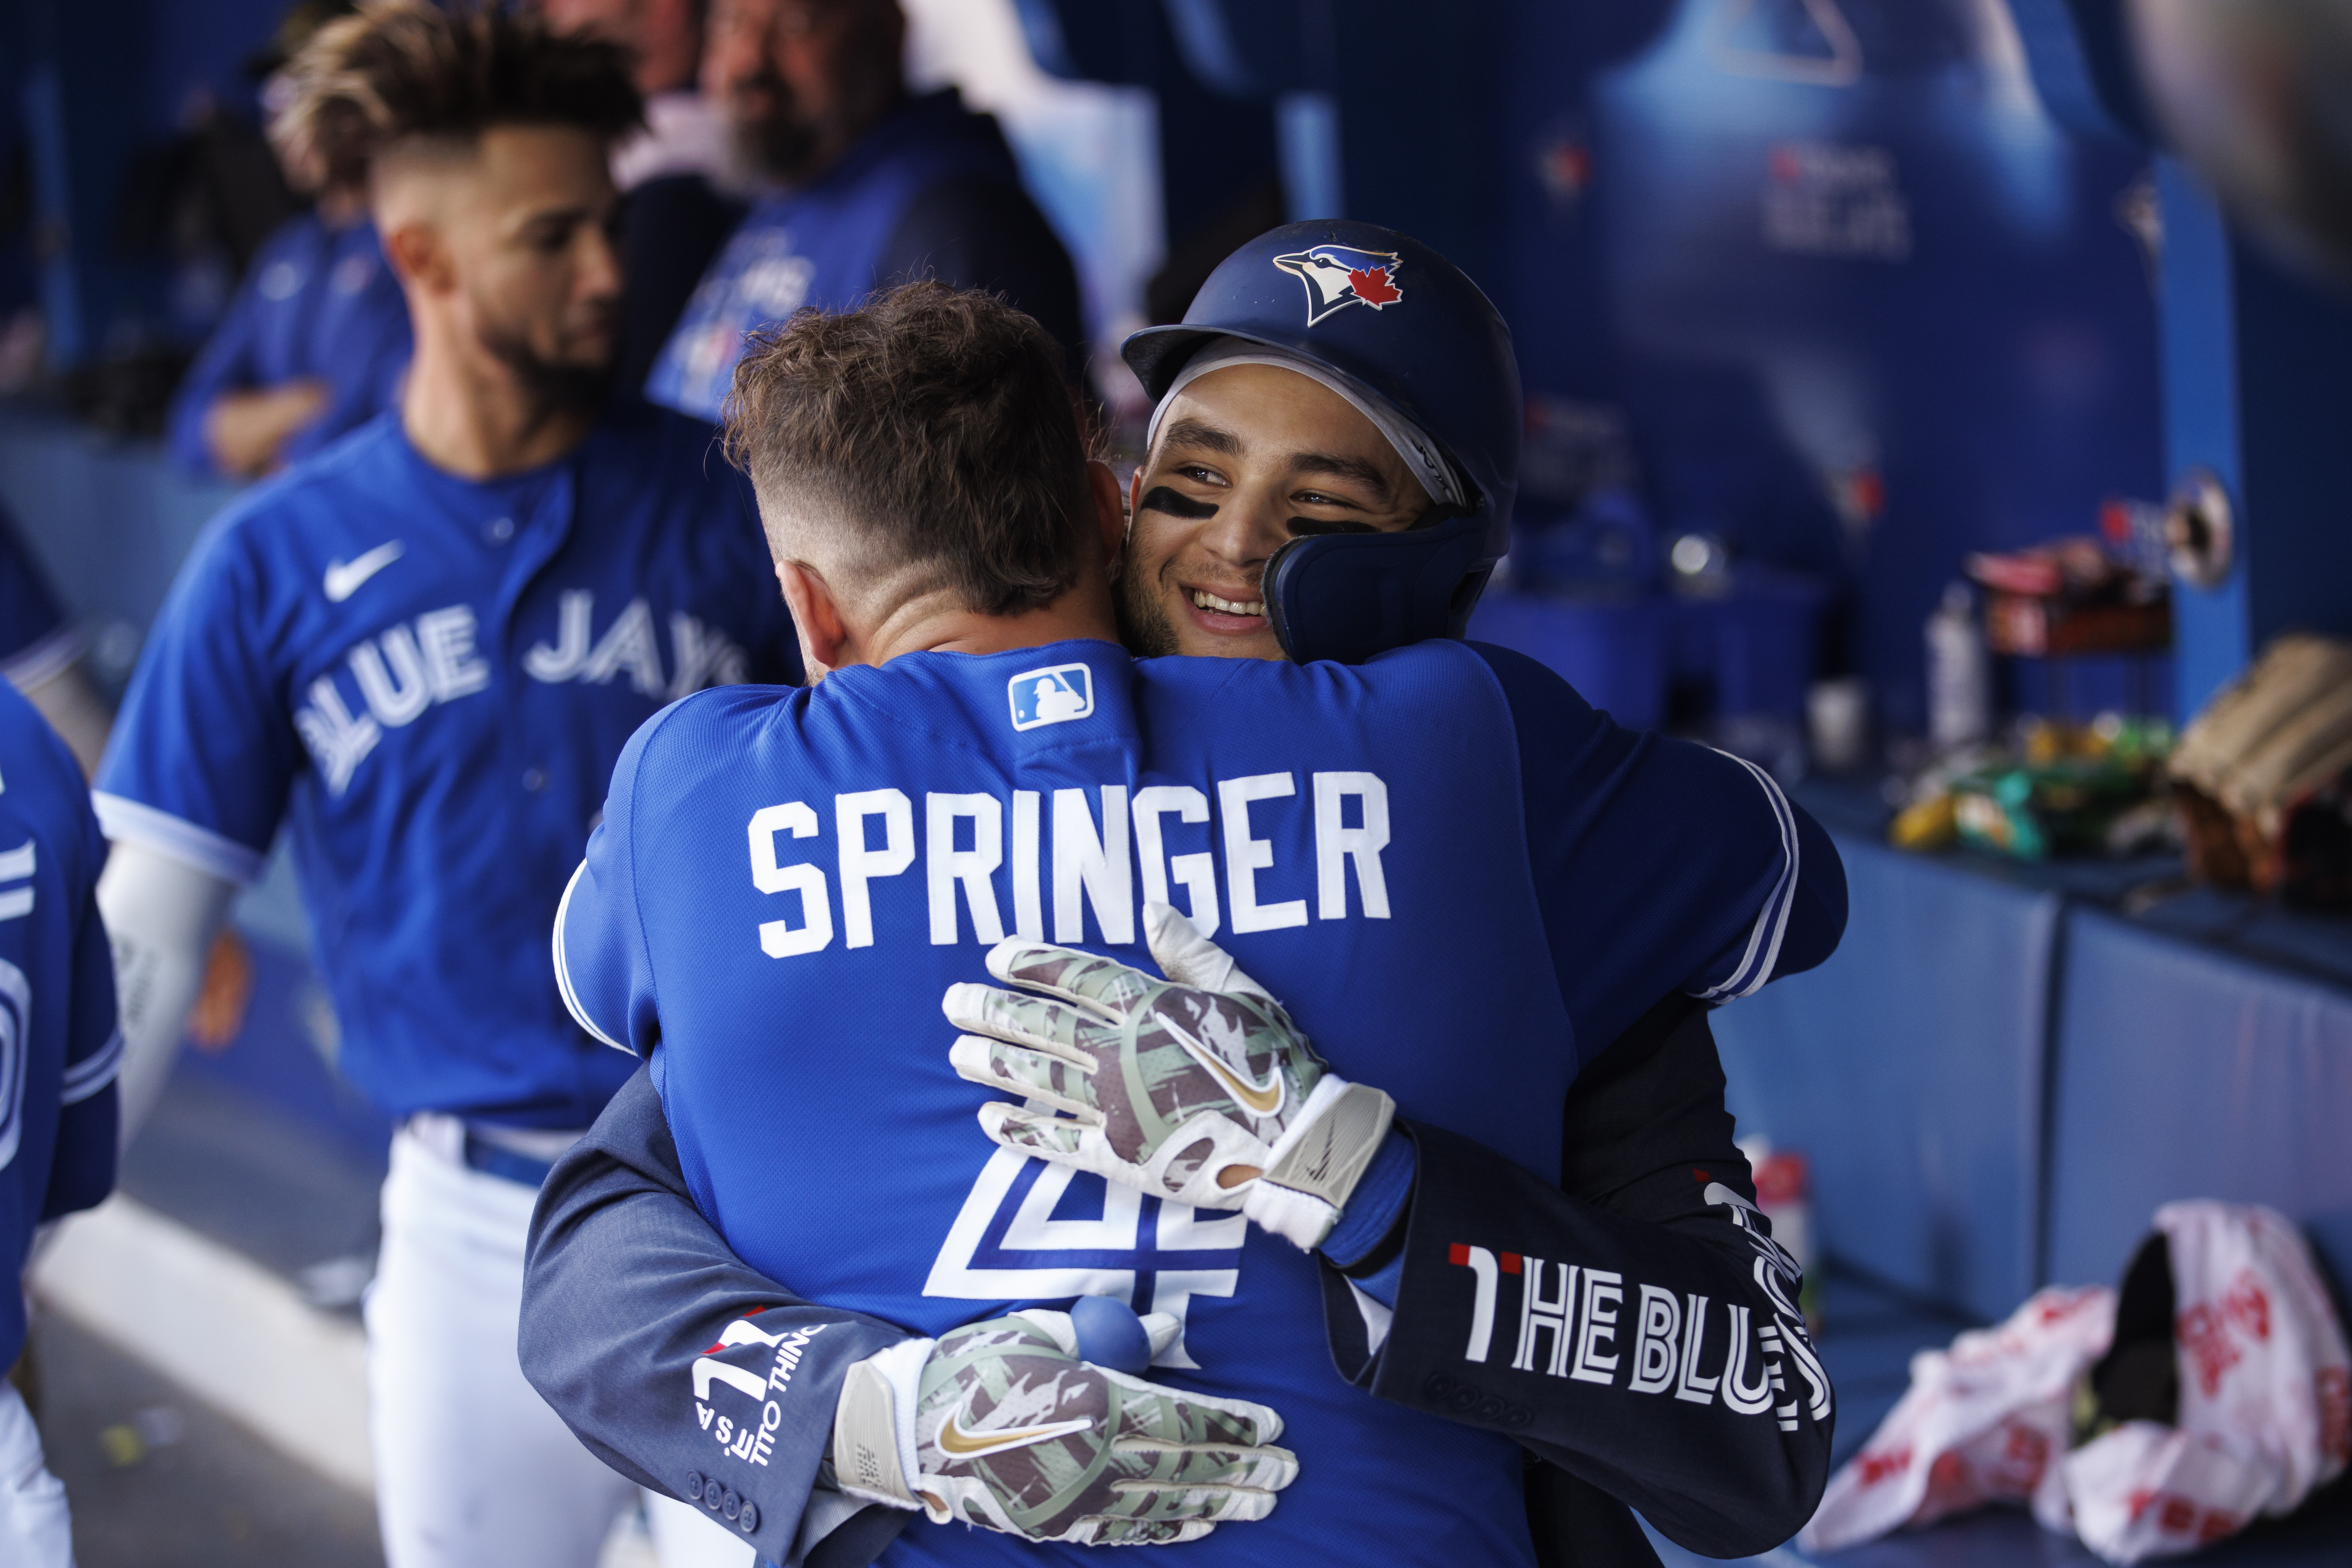 Jays drop series finale to Rangers behind strong Perez start